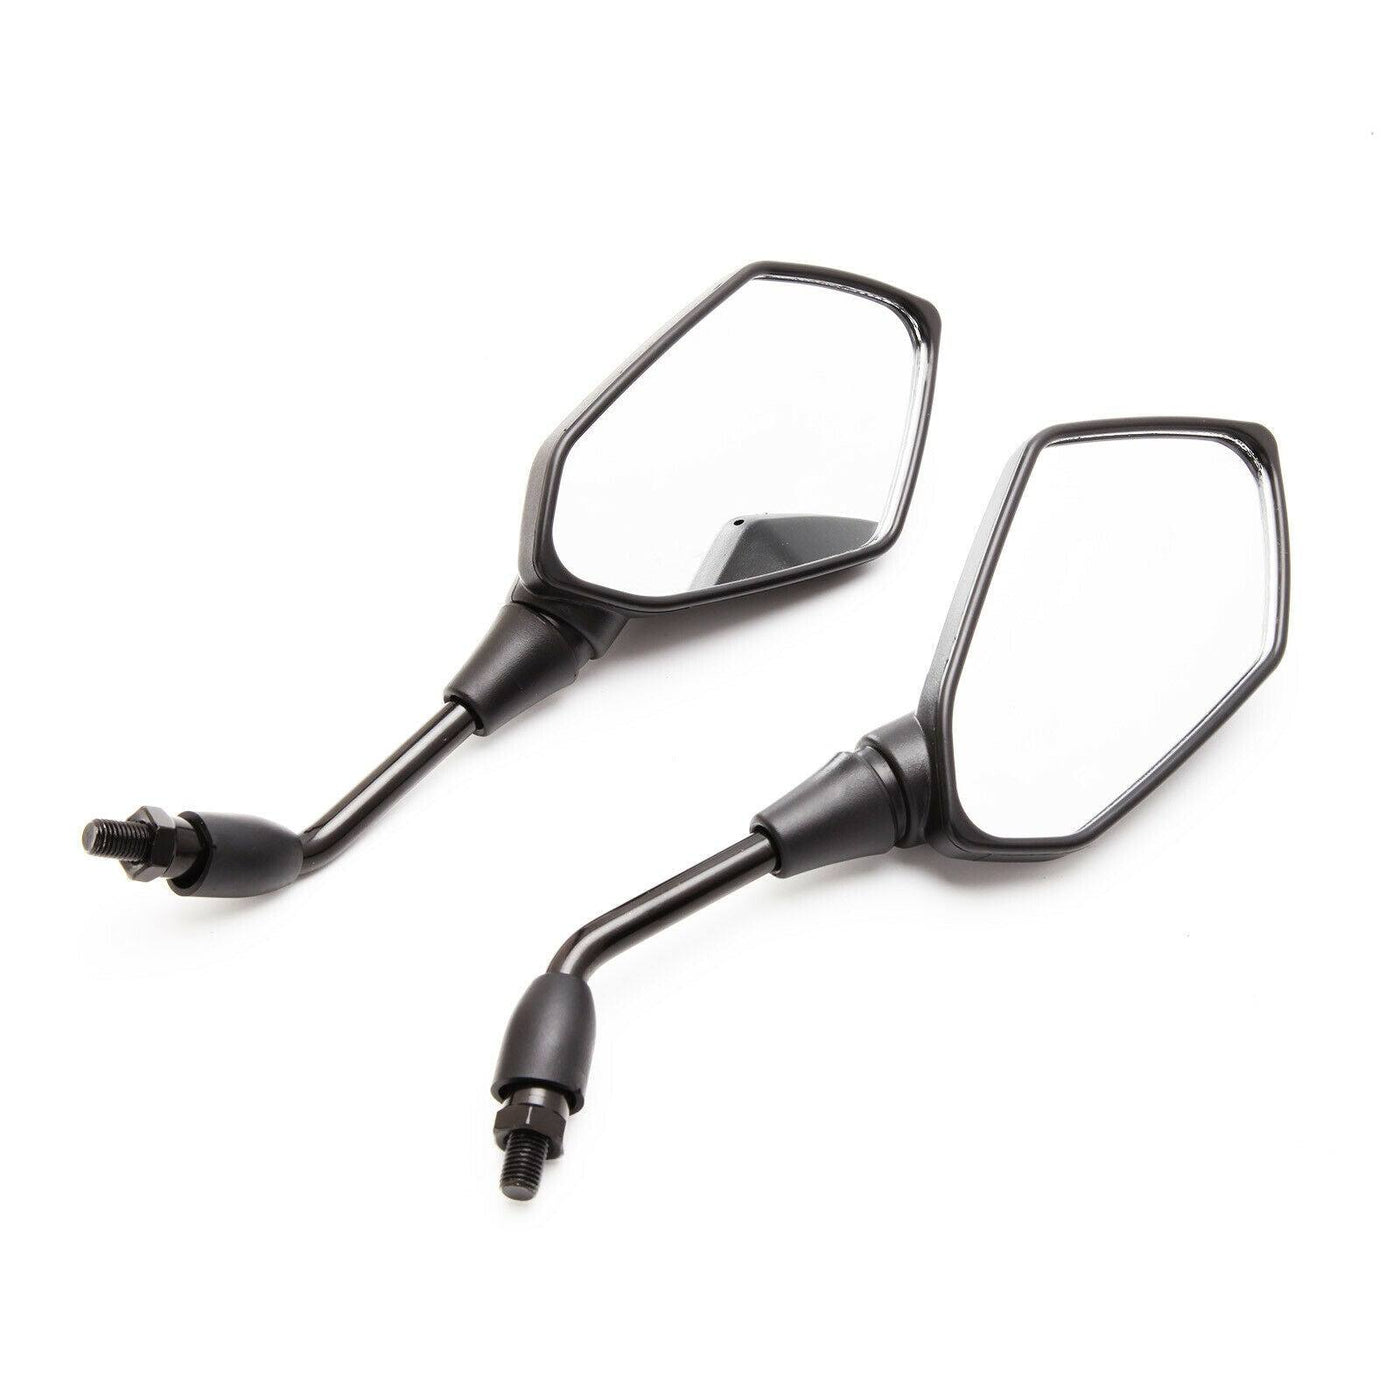 Black Motorcycle Rearview Mirrors 10mm Off Road For HONDA XR650L XR250L XR350R - Moto Life Products